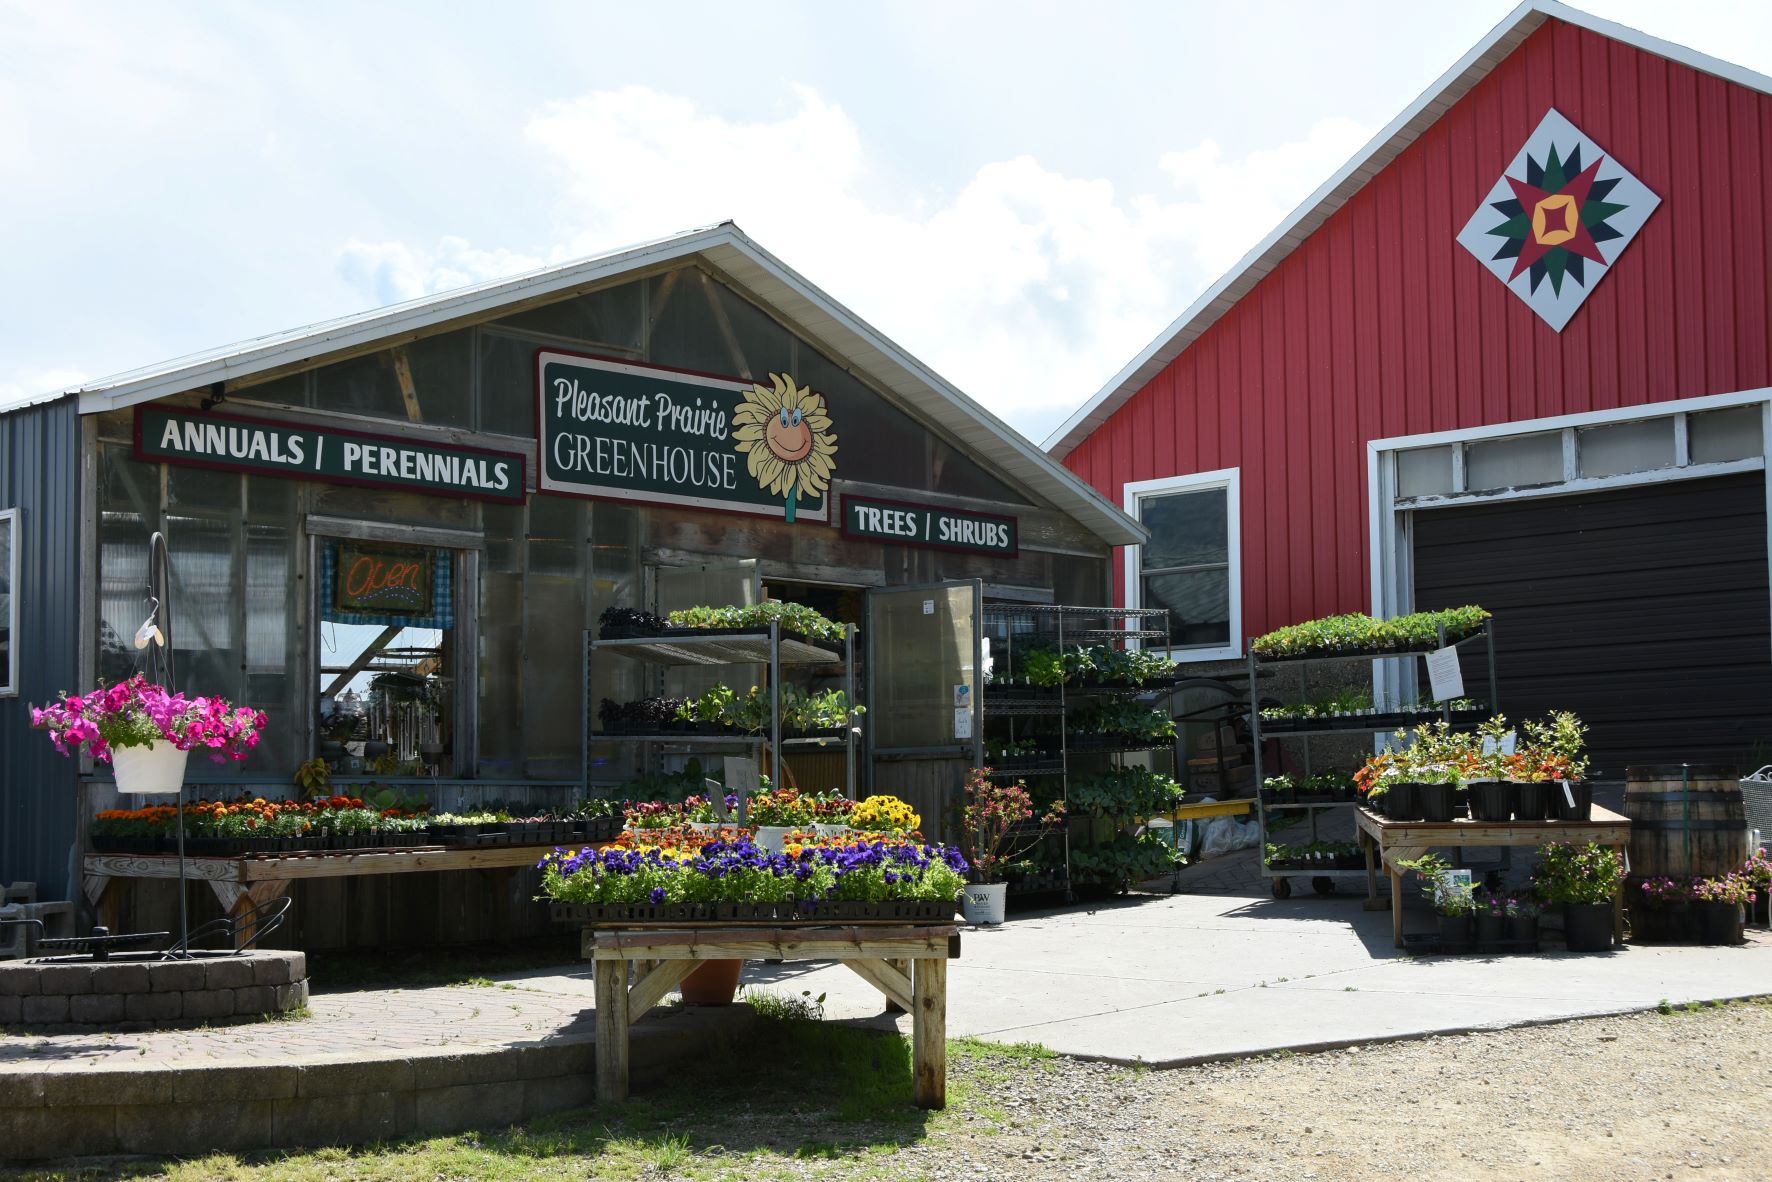 exterior of greenhouse entry with sign that reads, "Pleasant Prairie Greennouse, annuals, perennials, trees, shrubs"